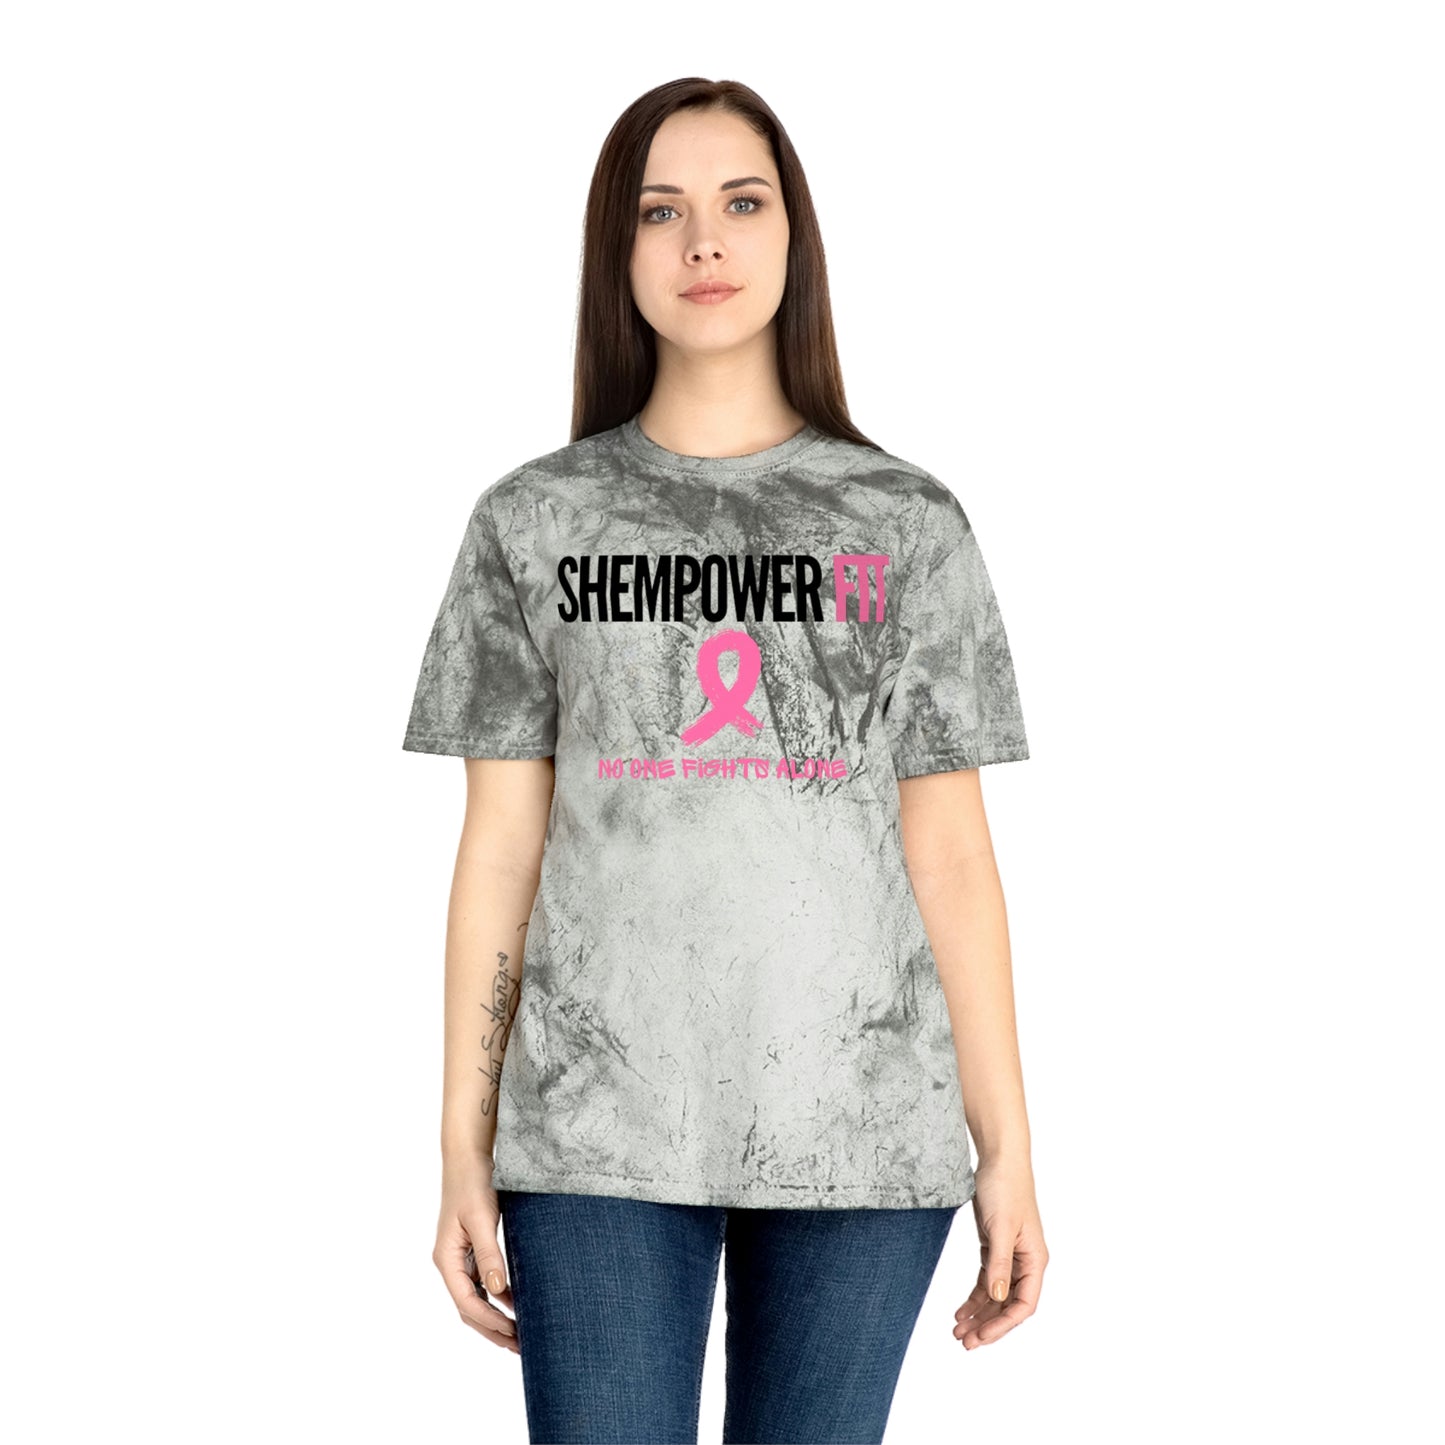 Breast Cancer ShEmpower Fit